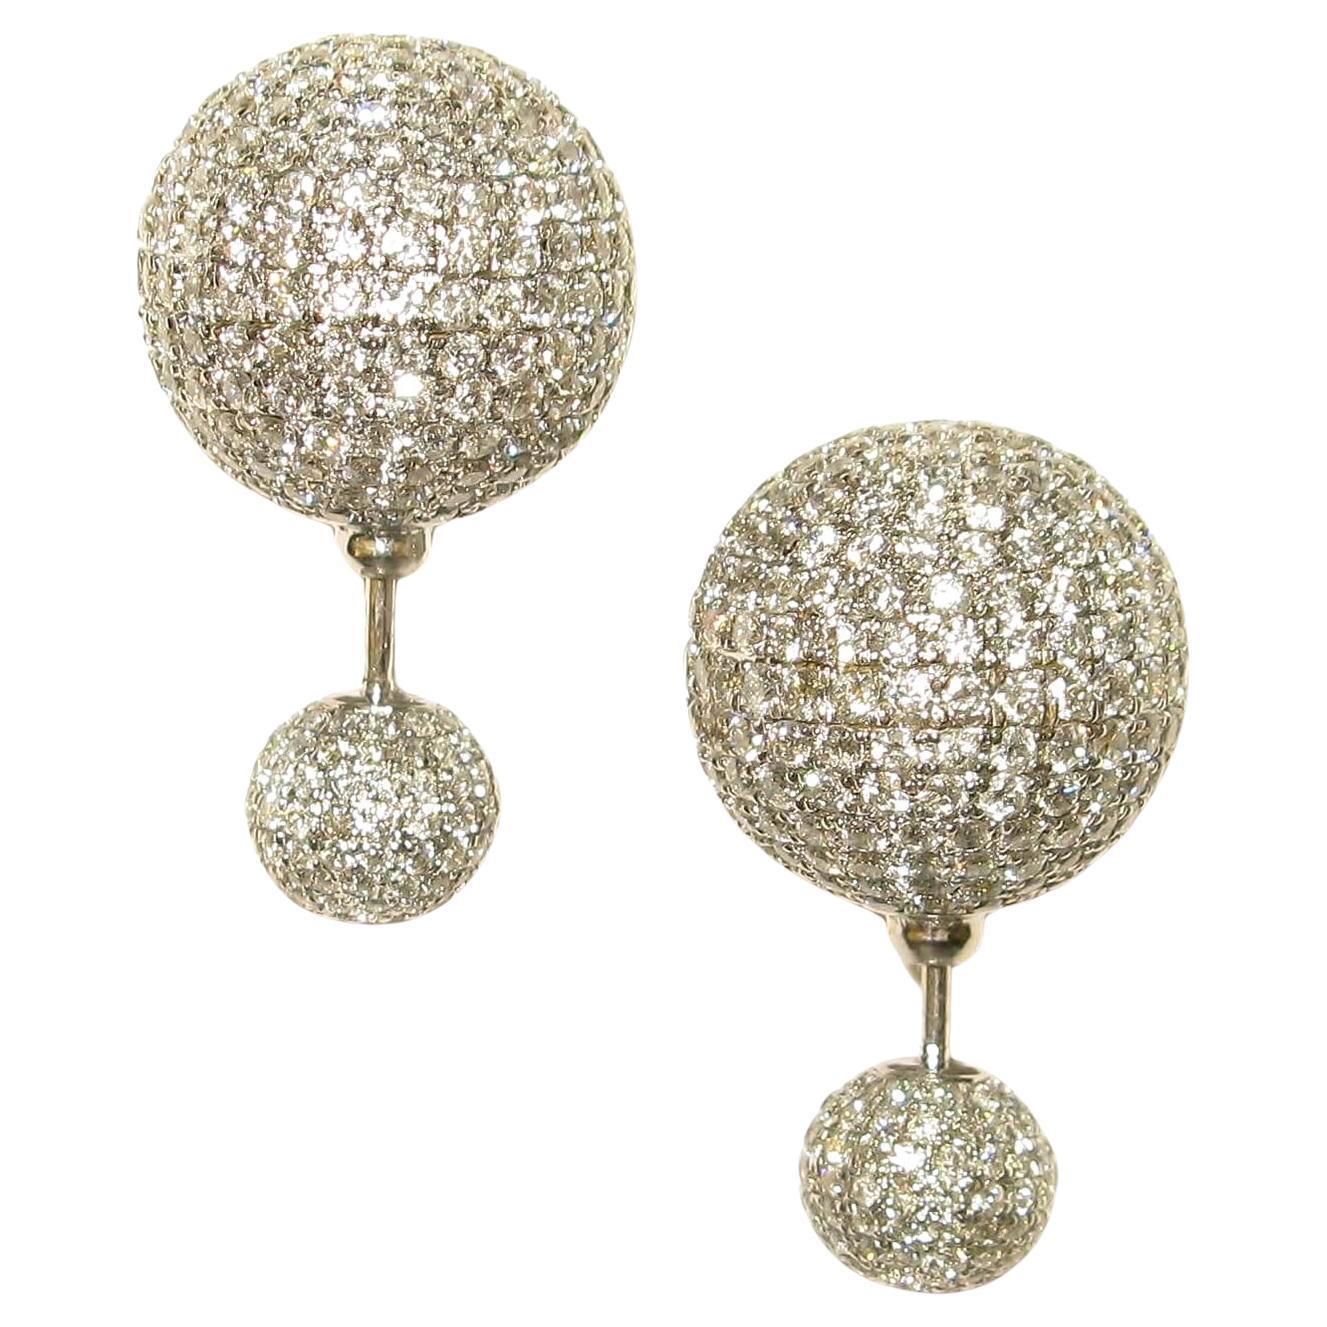 White Pave Diamond Ball Earrings Made In 18k Gold & Silver